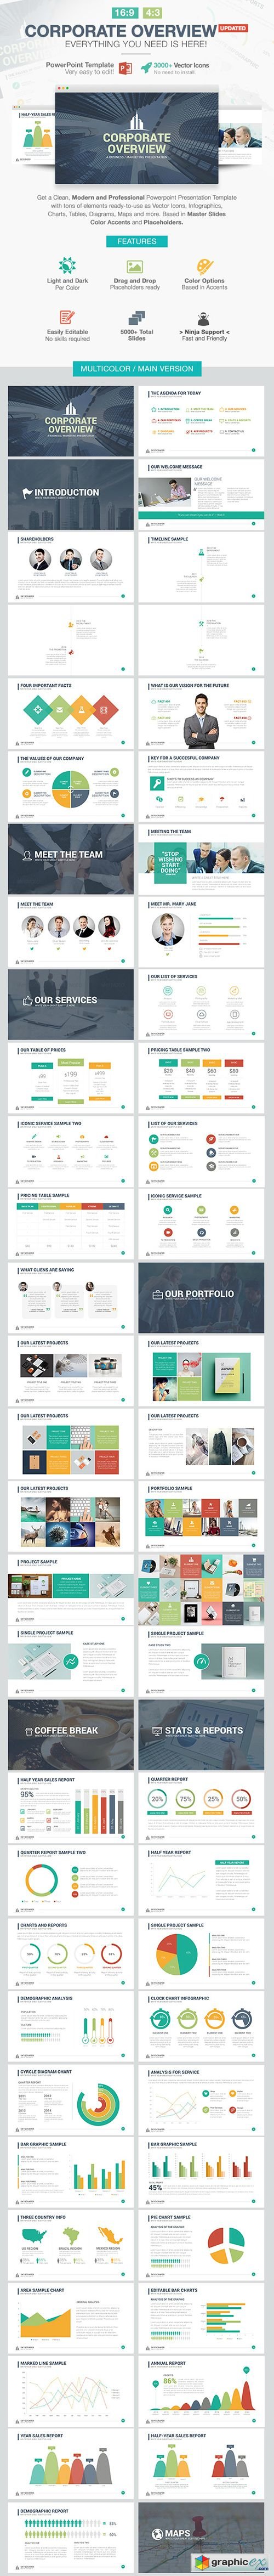  Corporate Overview Powerpoint Template